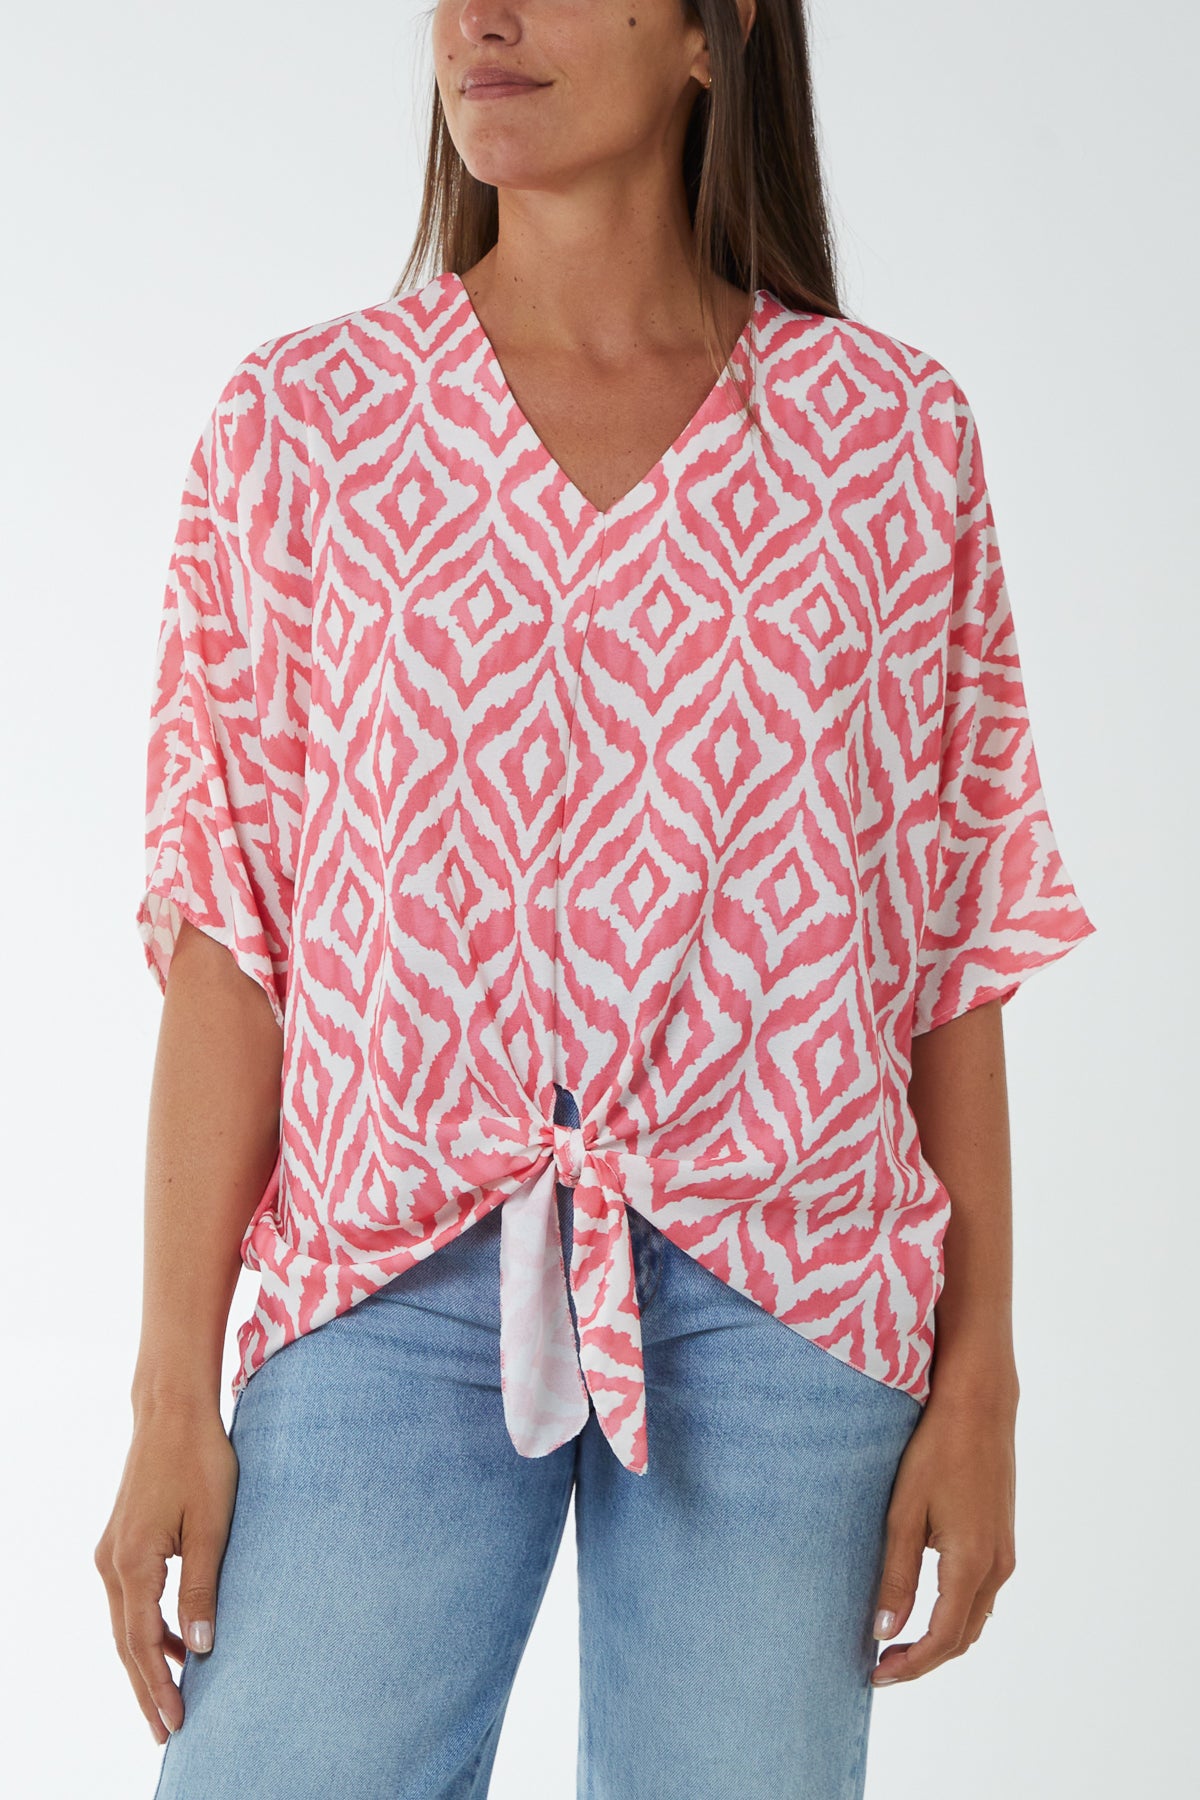 Geometric Print Knot Front Top